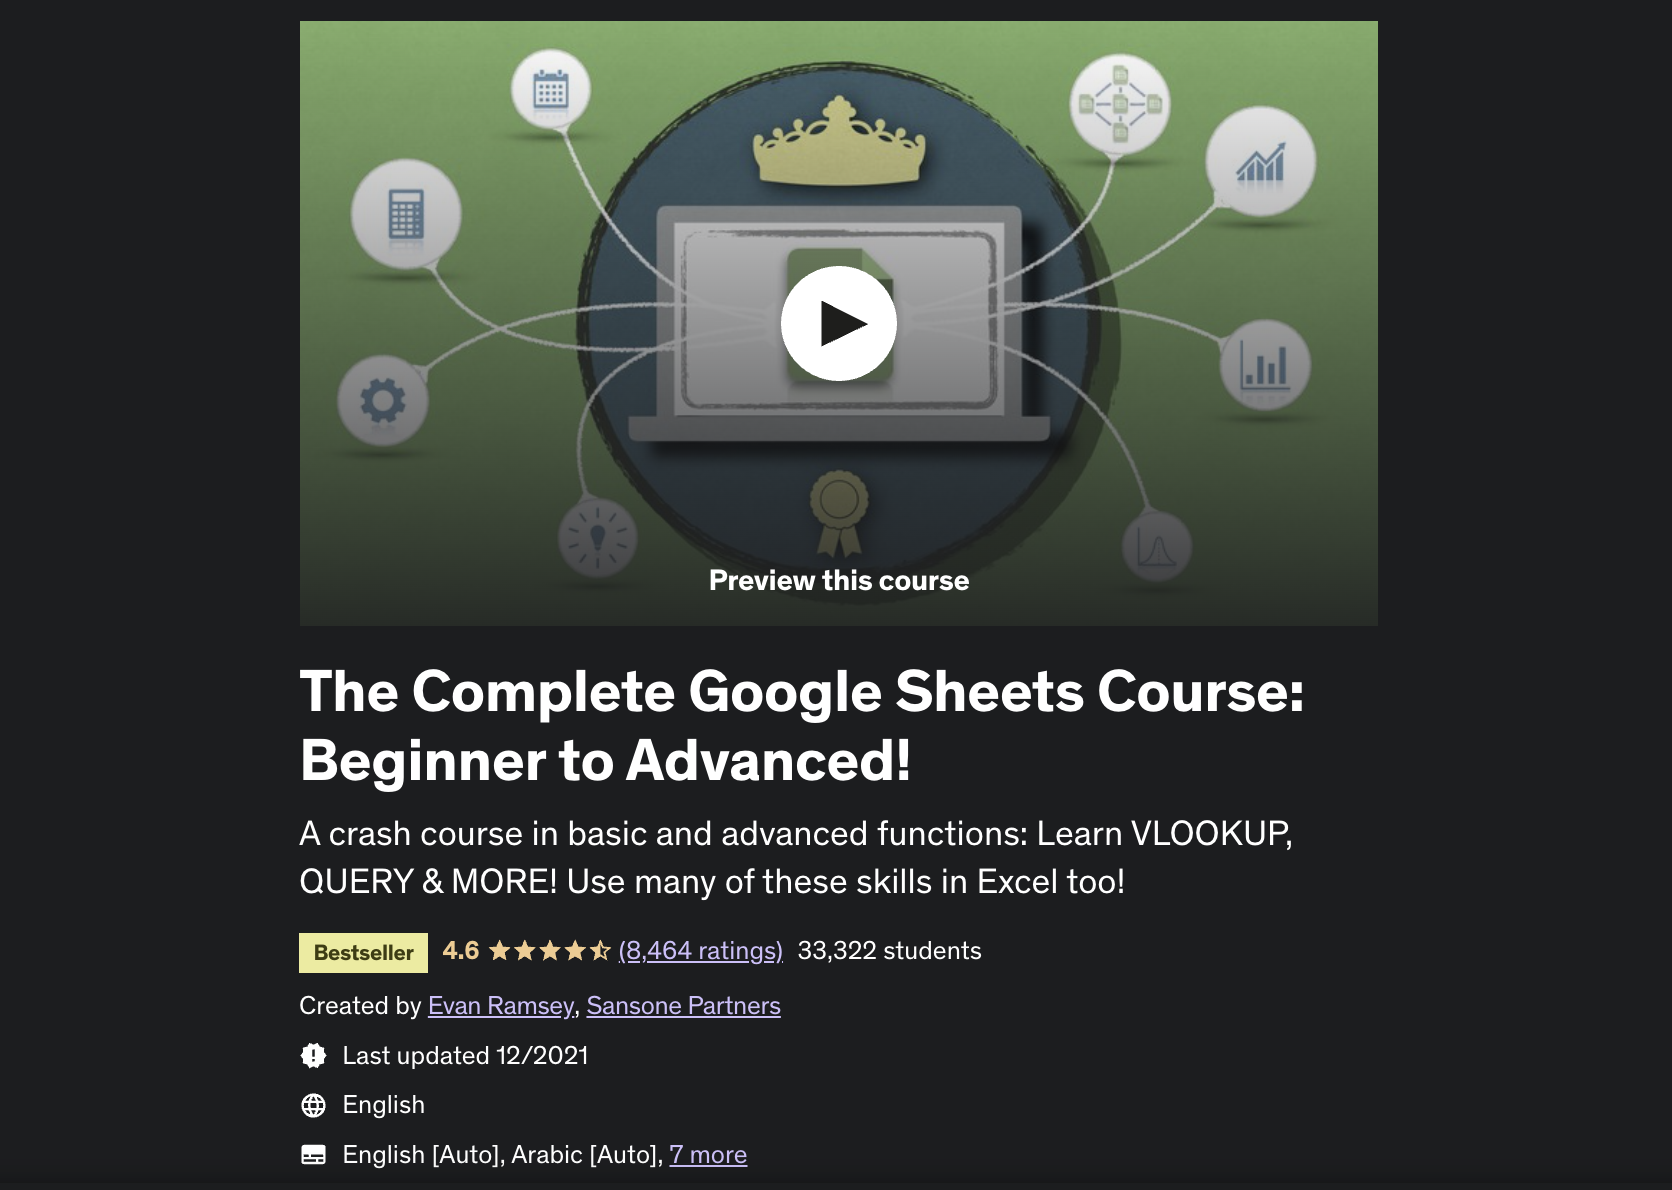 The Complete Google Sheets Course